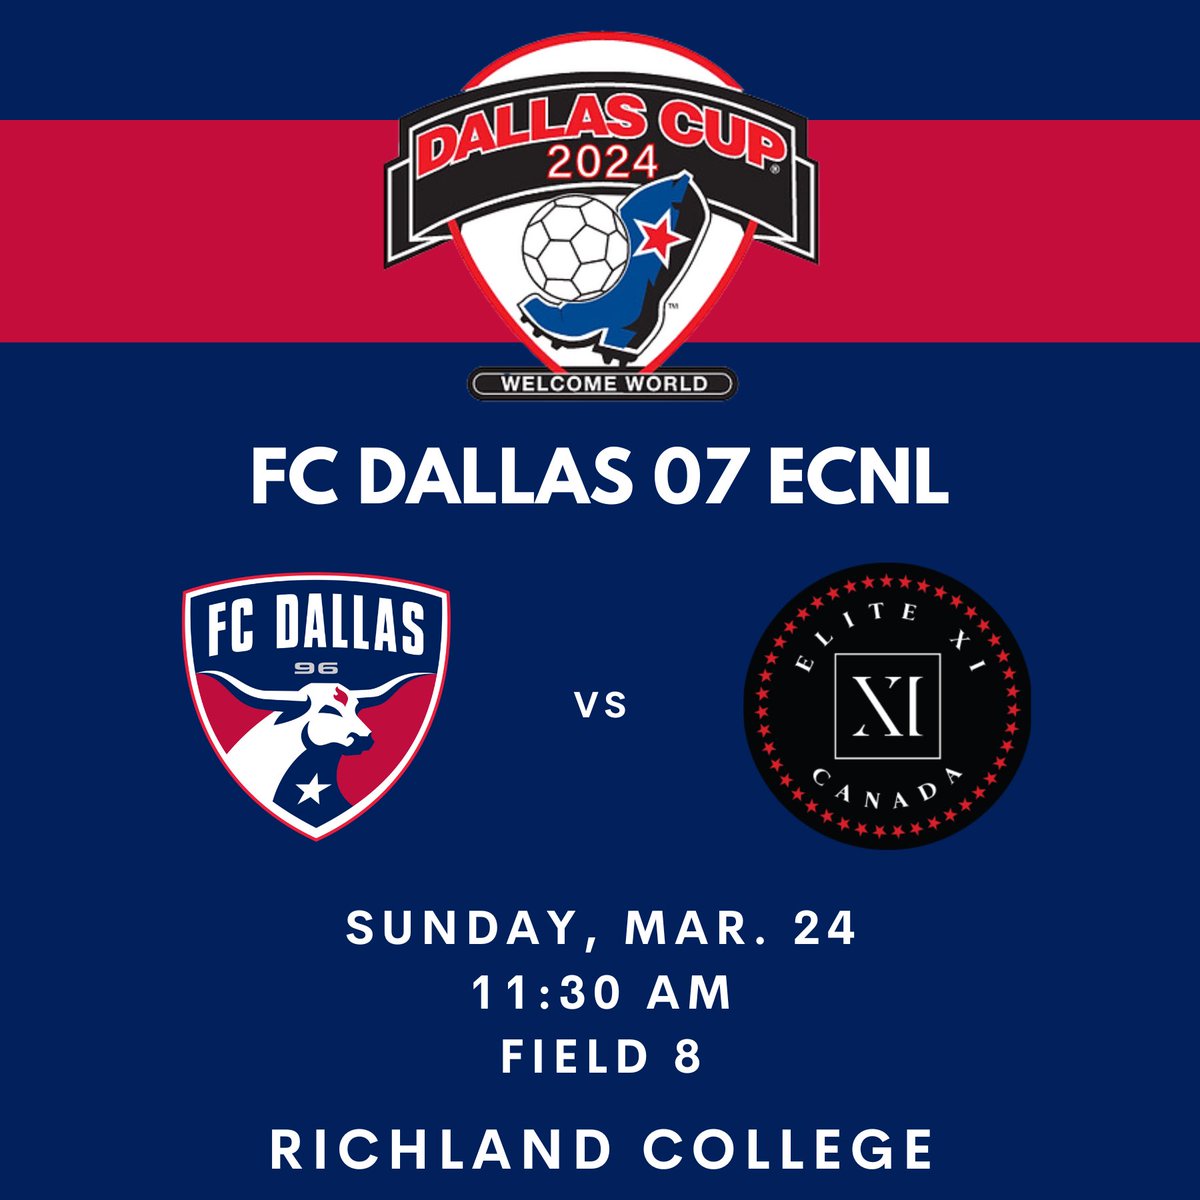 Day 2️⃣ @dallascup Come out and watch us at Richland College today‼️ #DTID | #HeartAndHustle ⏰11:30am 📍 Richland College | Field 8 @FCDwomen | @FCDallas